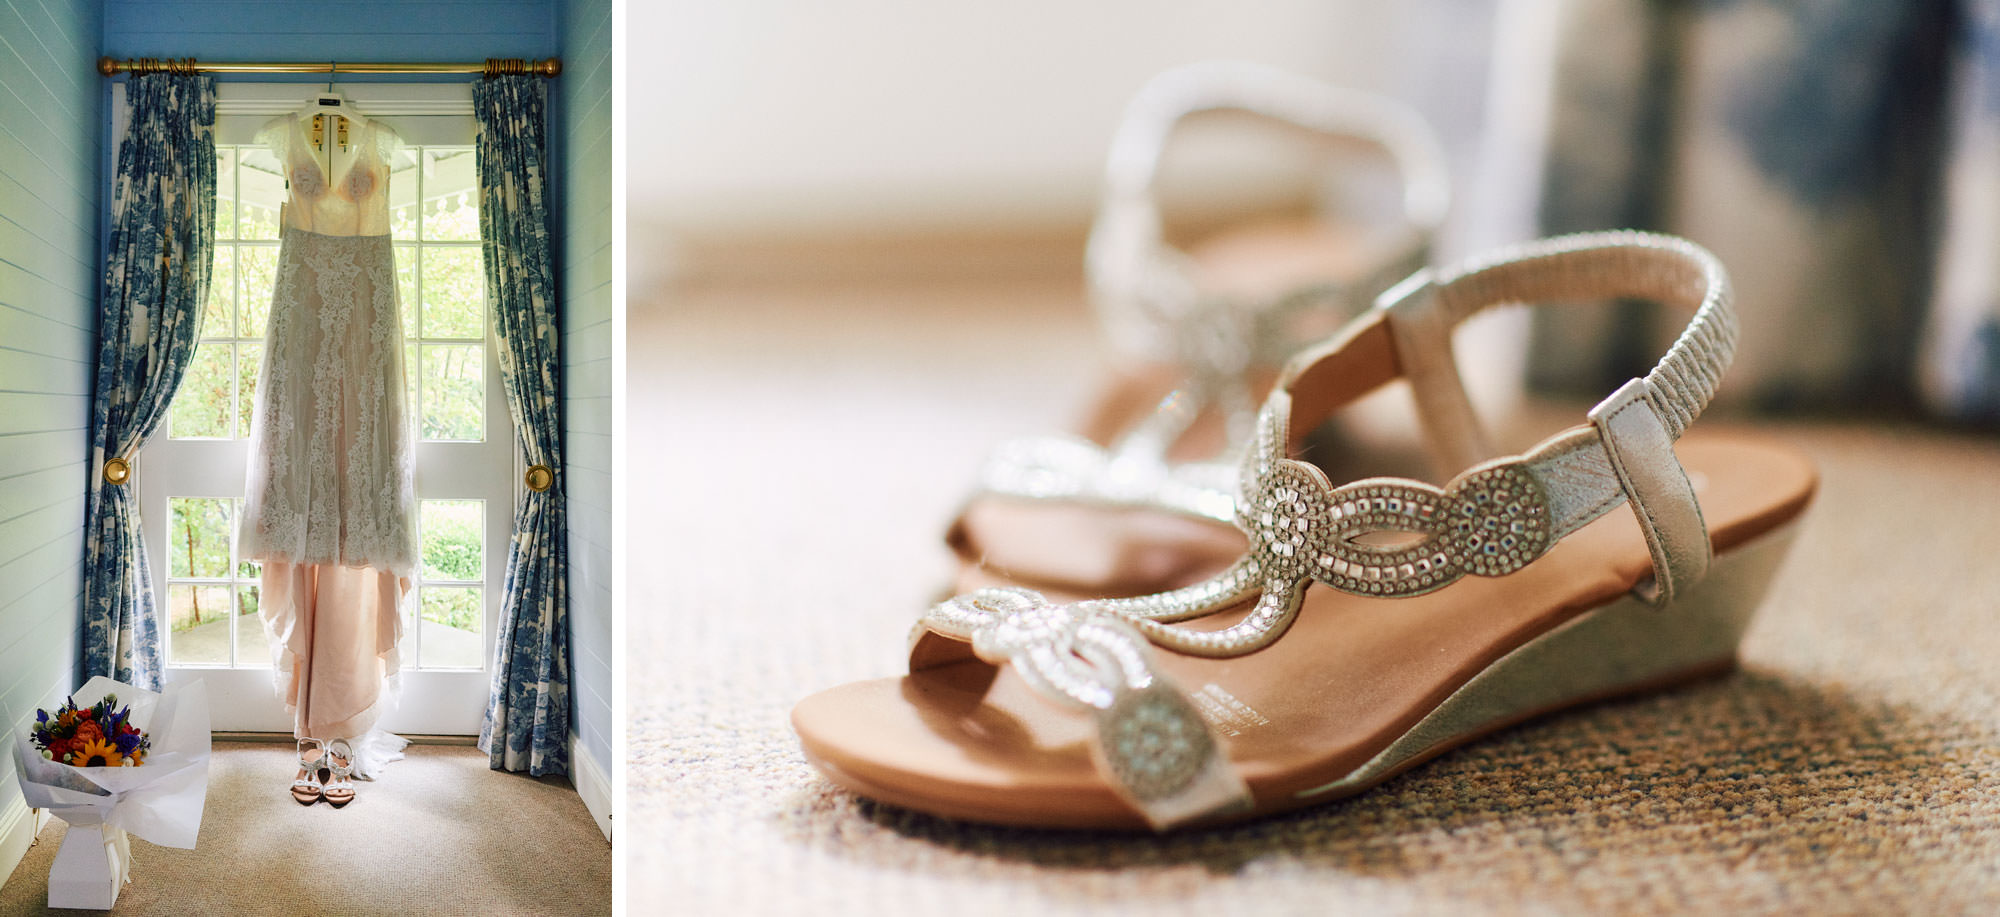 Bride's shoes and wedding dress